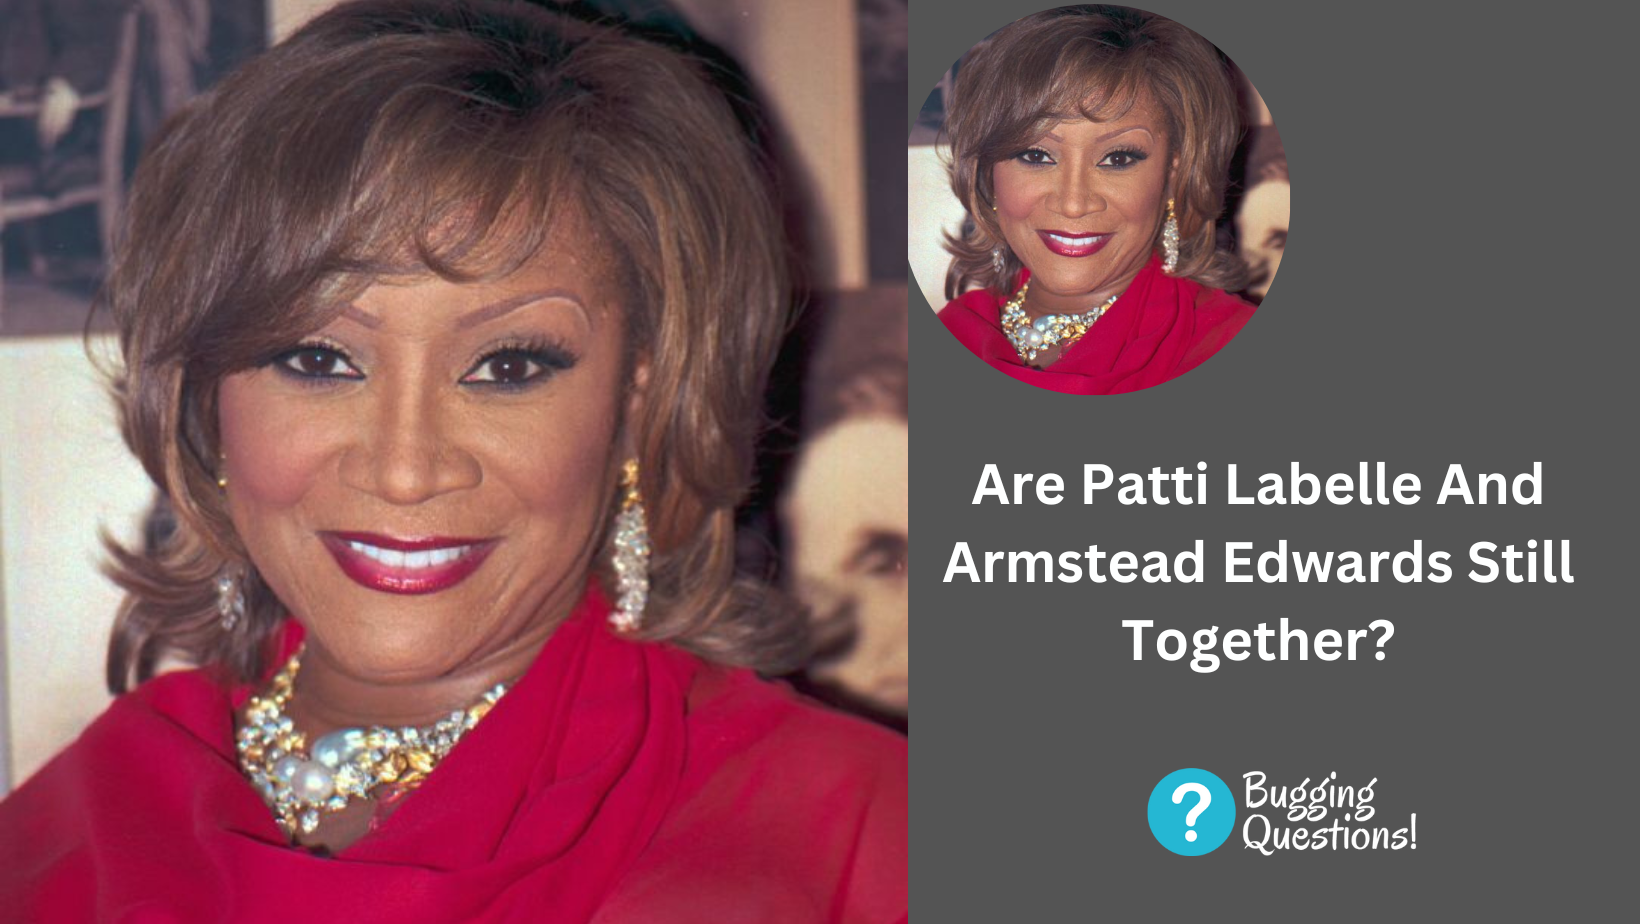 Are Patti Labelle And Armstead Edwards Still Together?